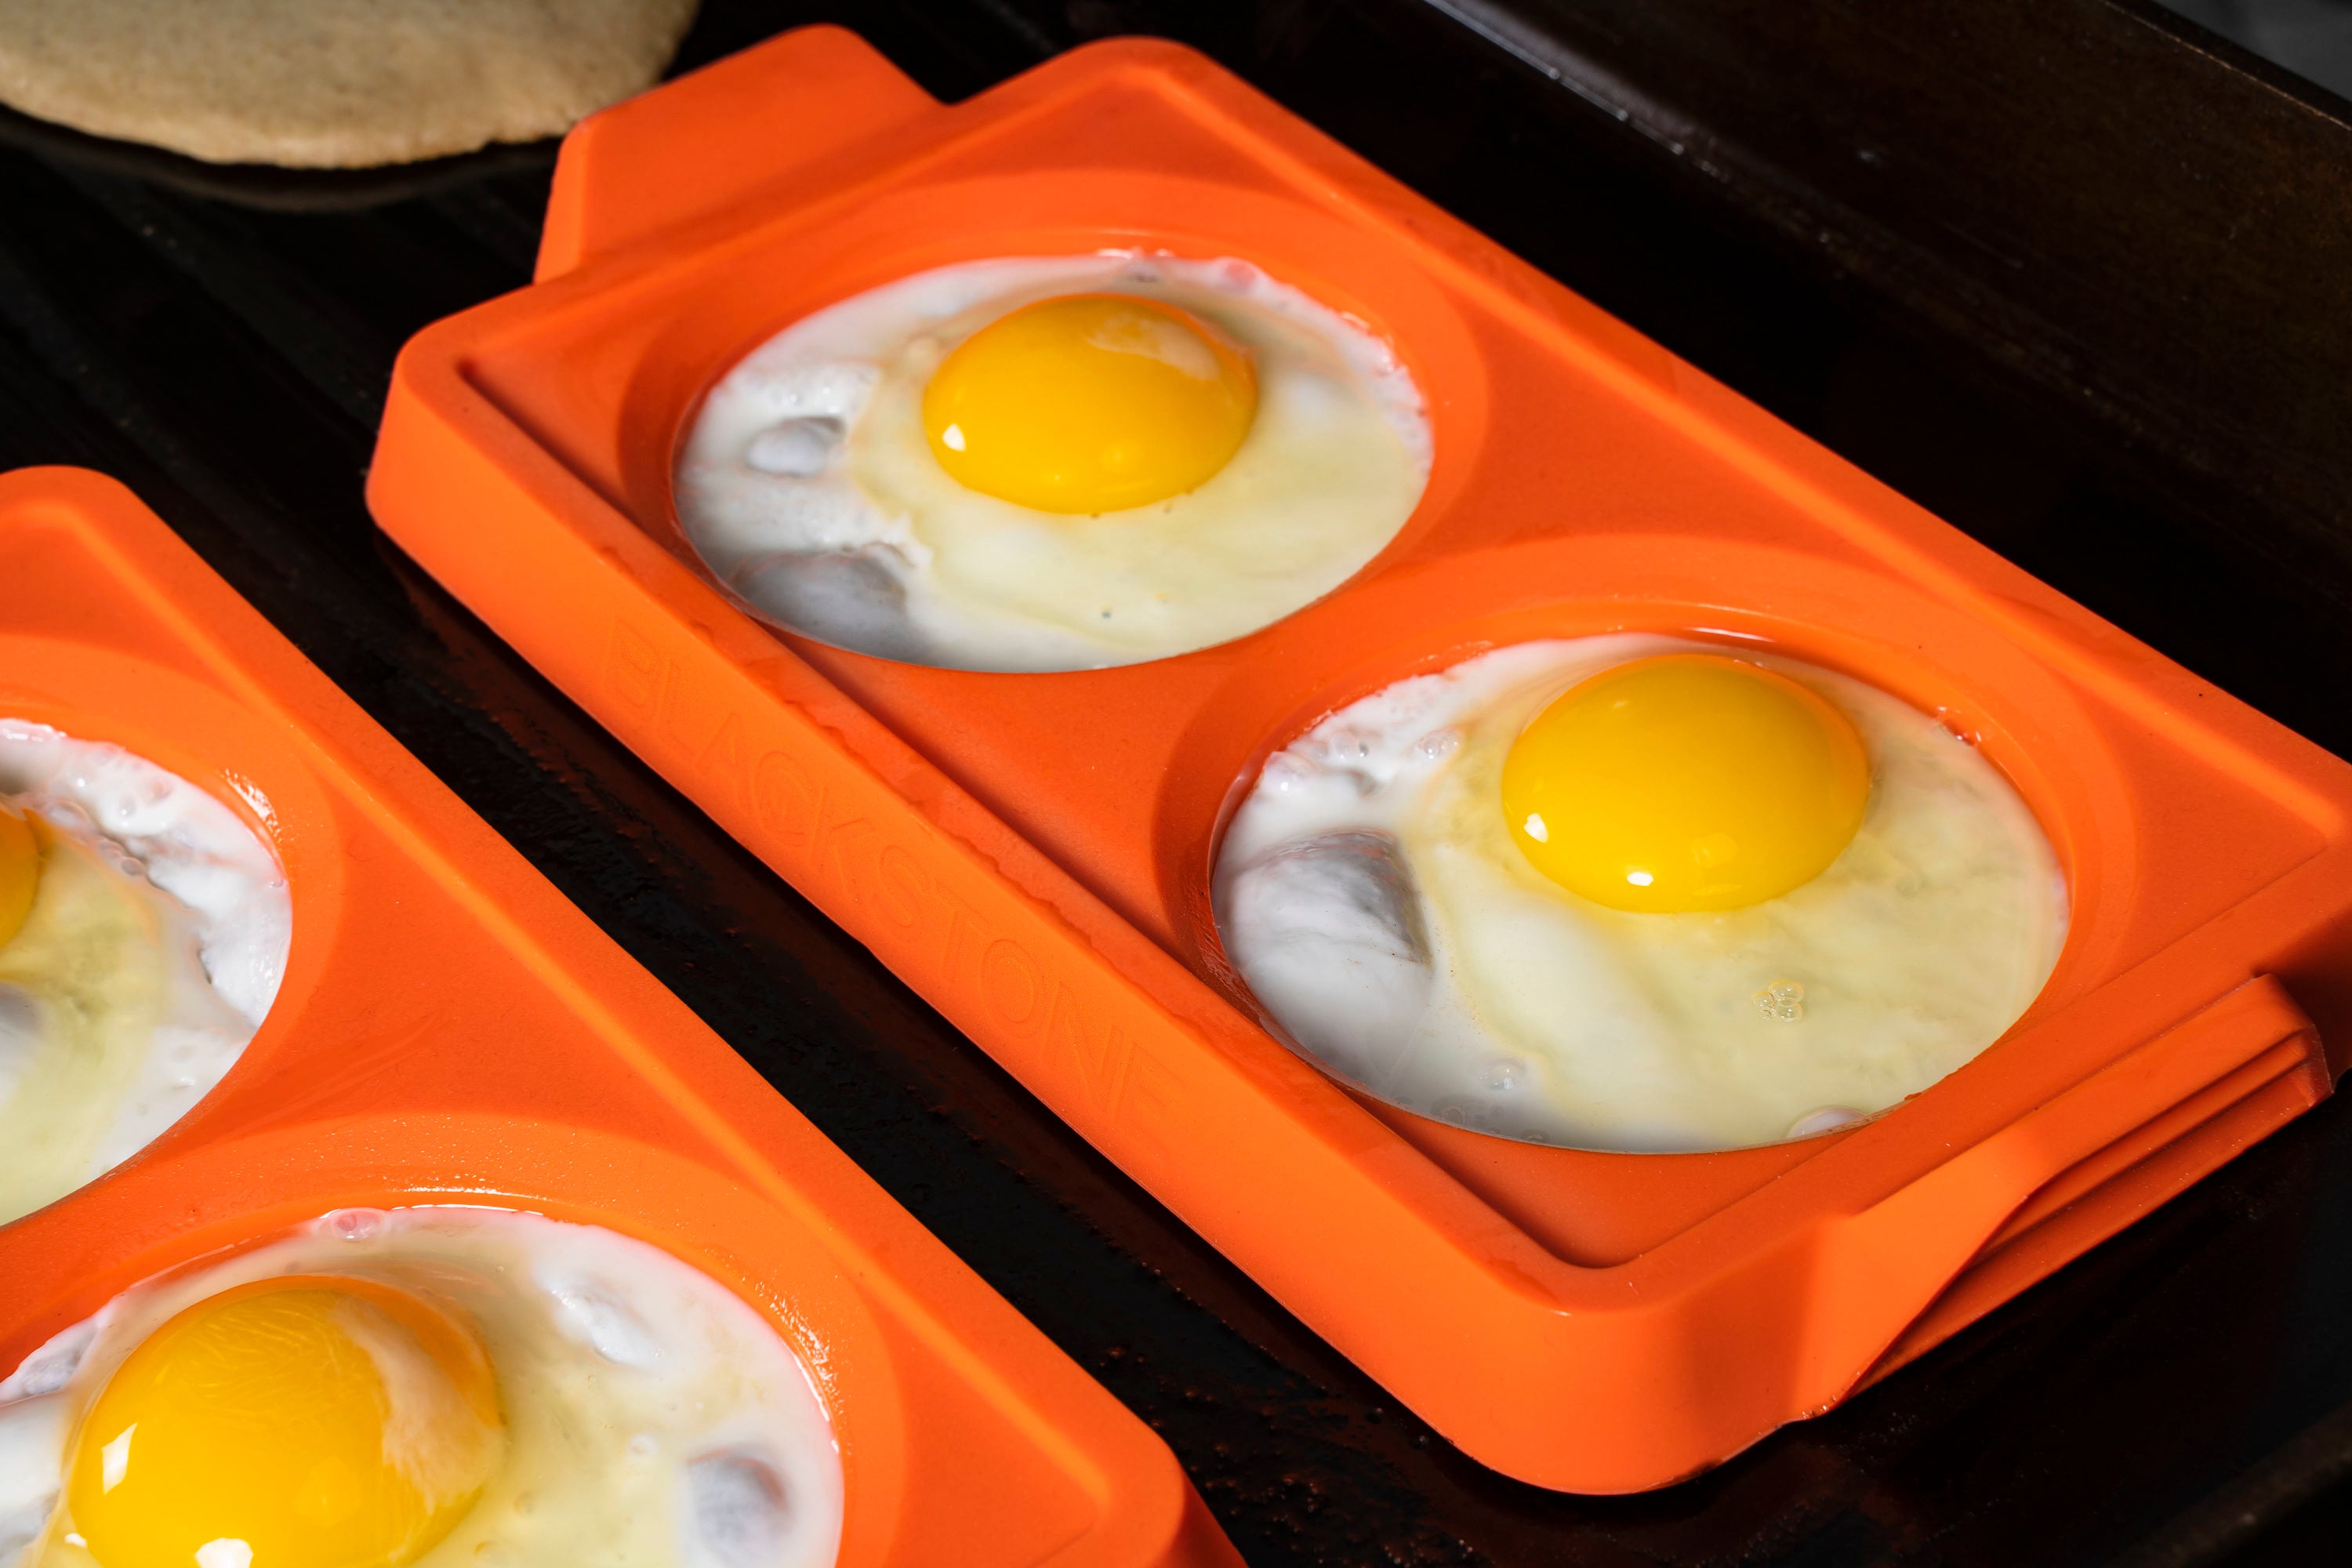 Cast Iron Lodge Silicone Egg Ring 4 – TheDepot.LakeviewOhio